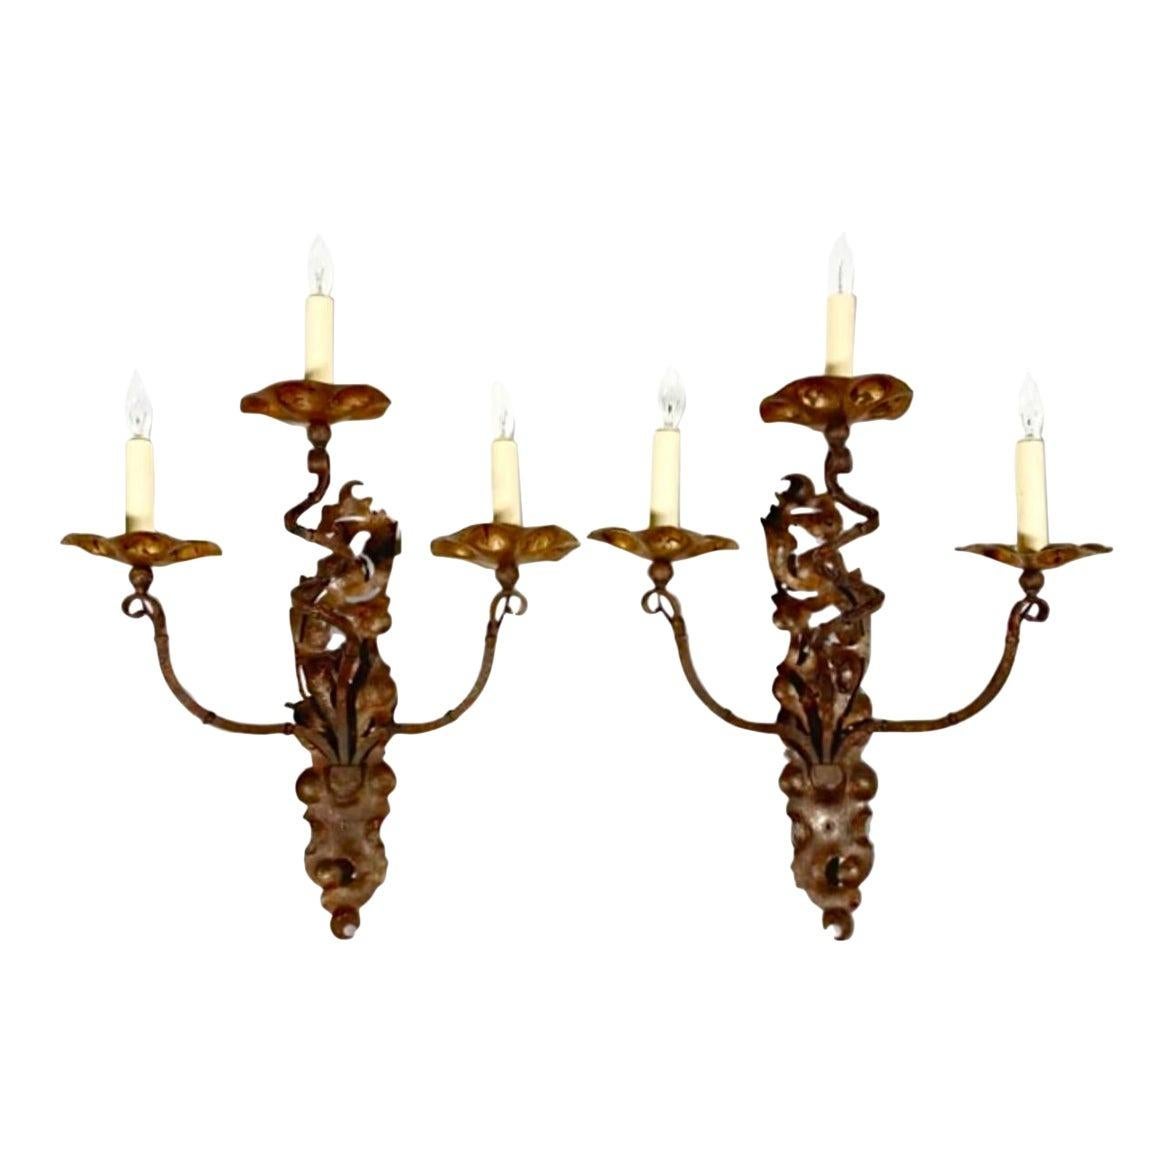 A stunning pair of vintage Italian iron sconces with gilt metal and distressed finish. Acquired at a Palm Beach estate.